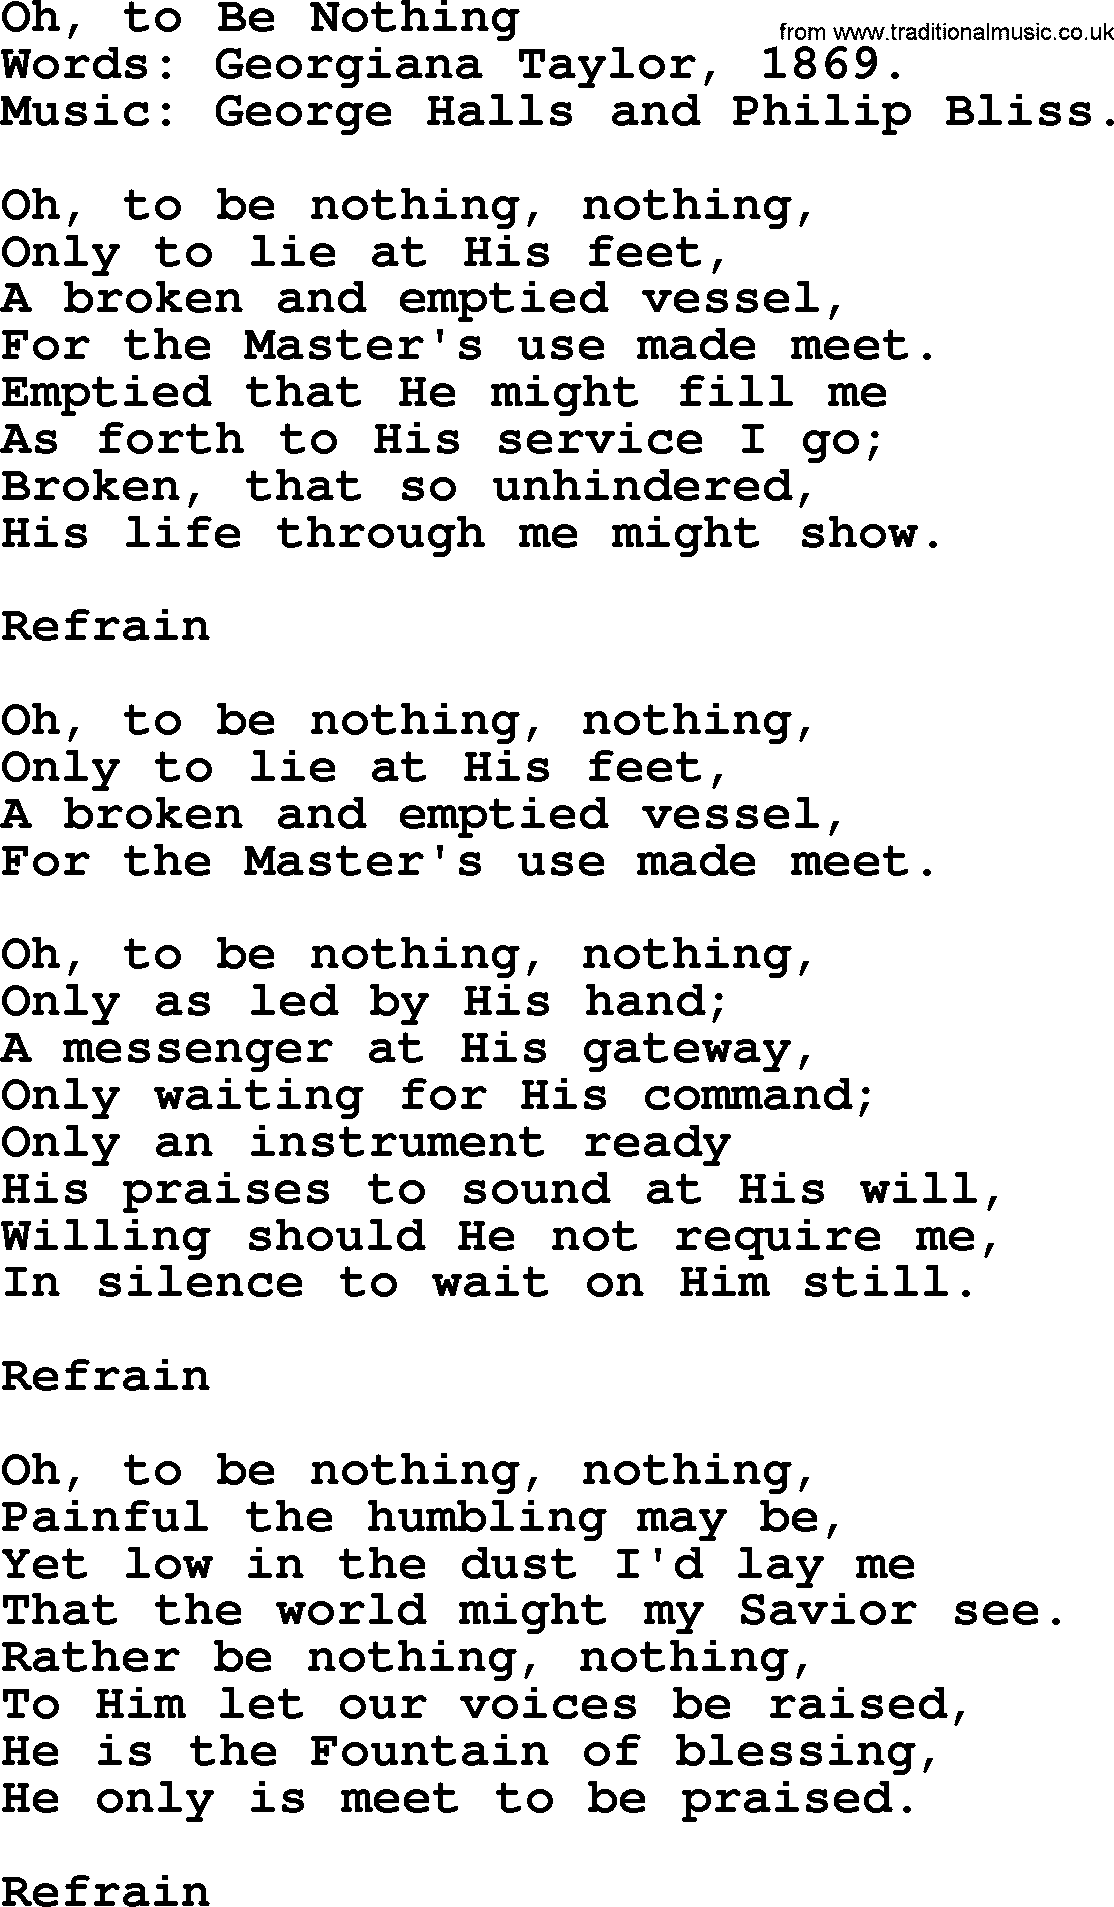 Philip Bliss Song: Oh, To Be Nothing, lyrics